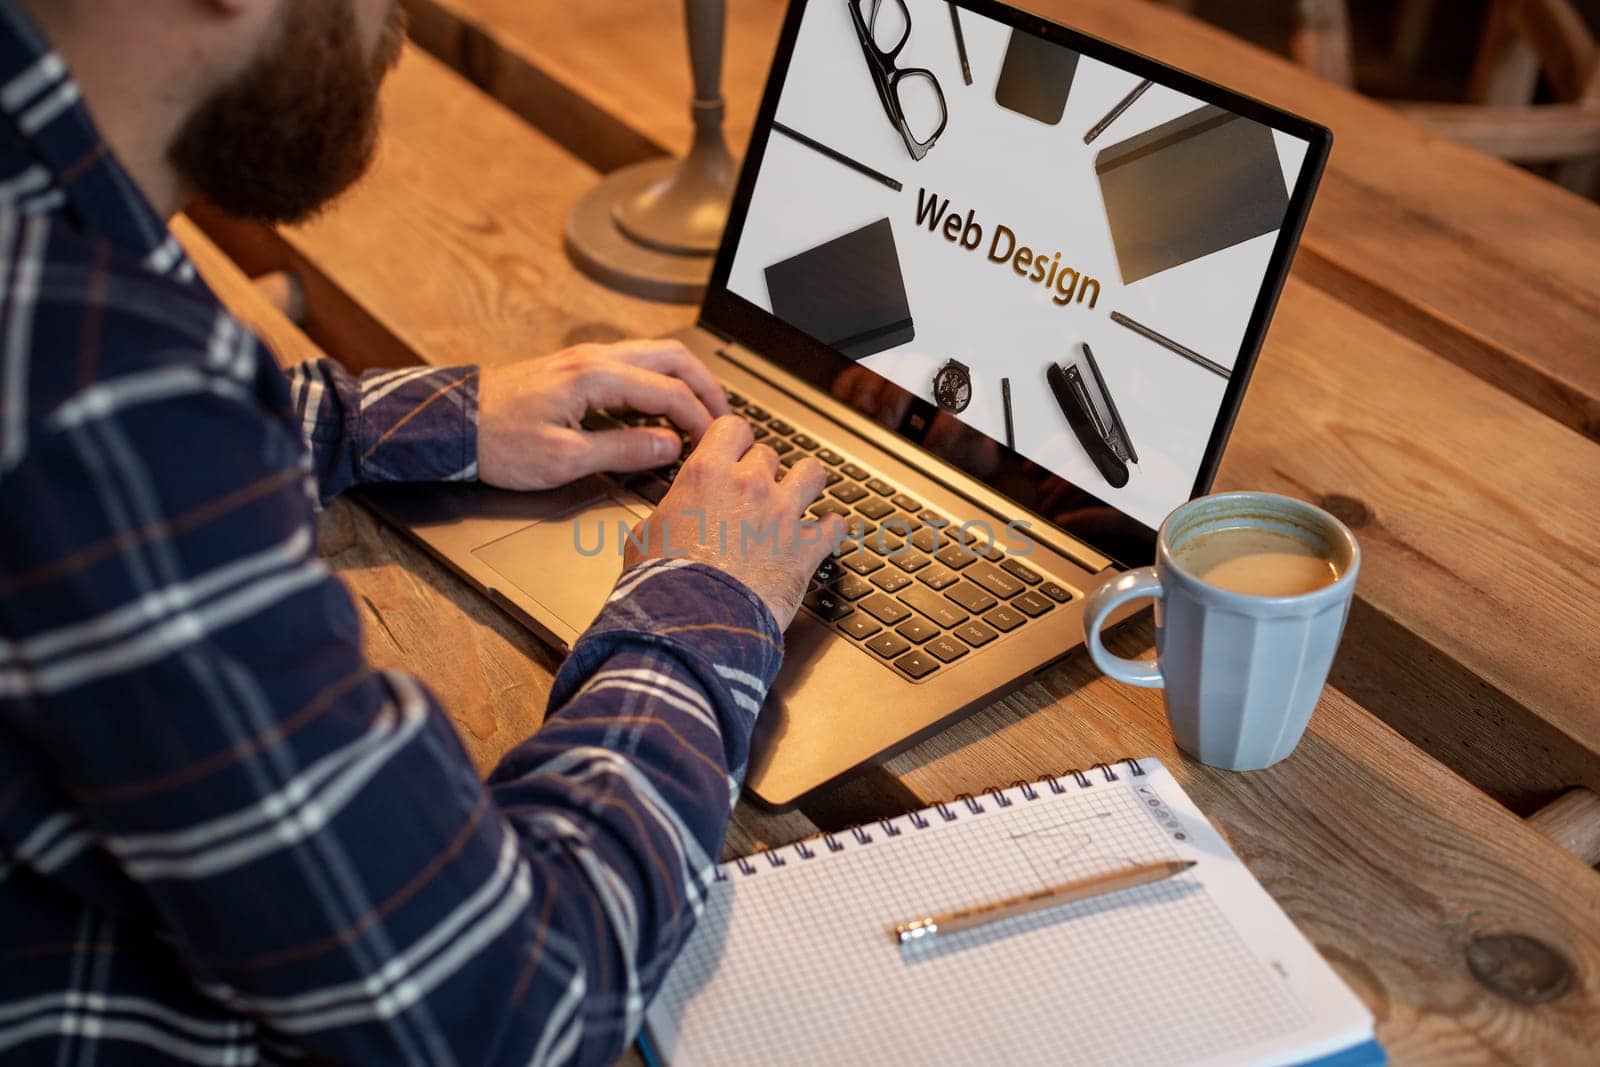 Cropped image of a young man working on his laptop in a coffee shop, rear view of business man hands busy using laptop at office desk, young male student texting on computer sitting at wooden table. Design. Web design